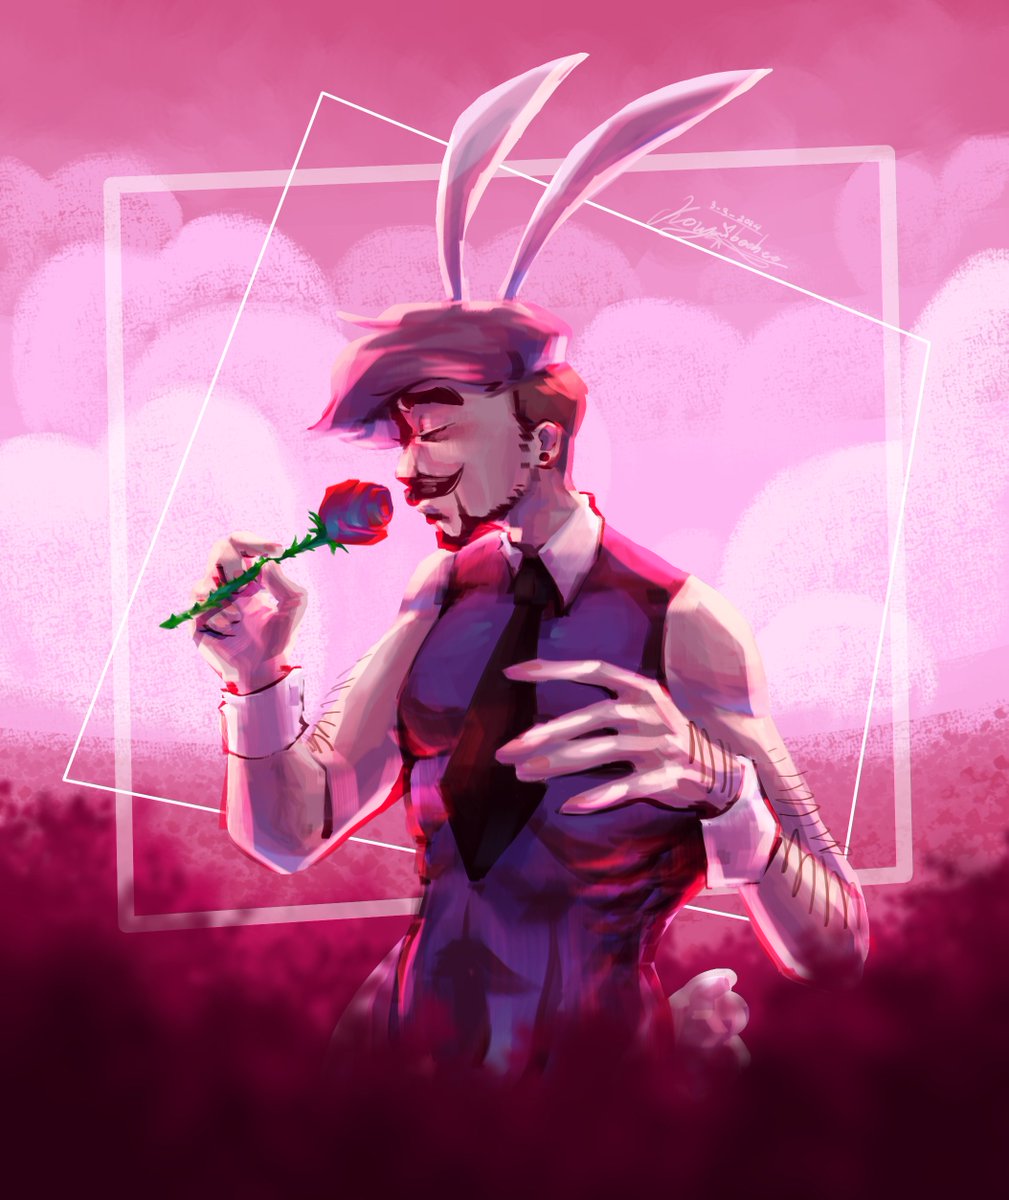 Bunny boy 🐇🌹
(tryna experiment with a different style of painting a little bit sdkljfhnsdjf) 
#septicart #septicartparty #jamesonjackson